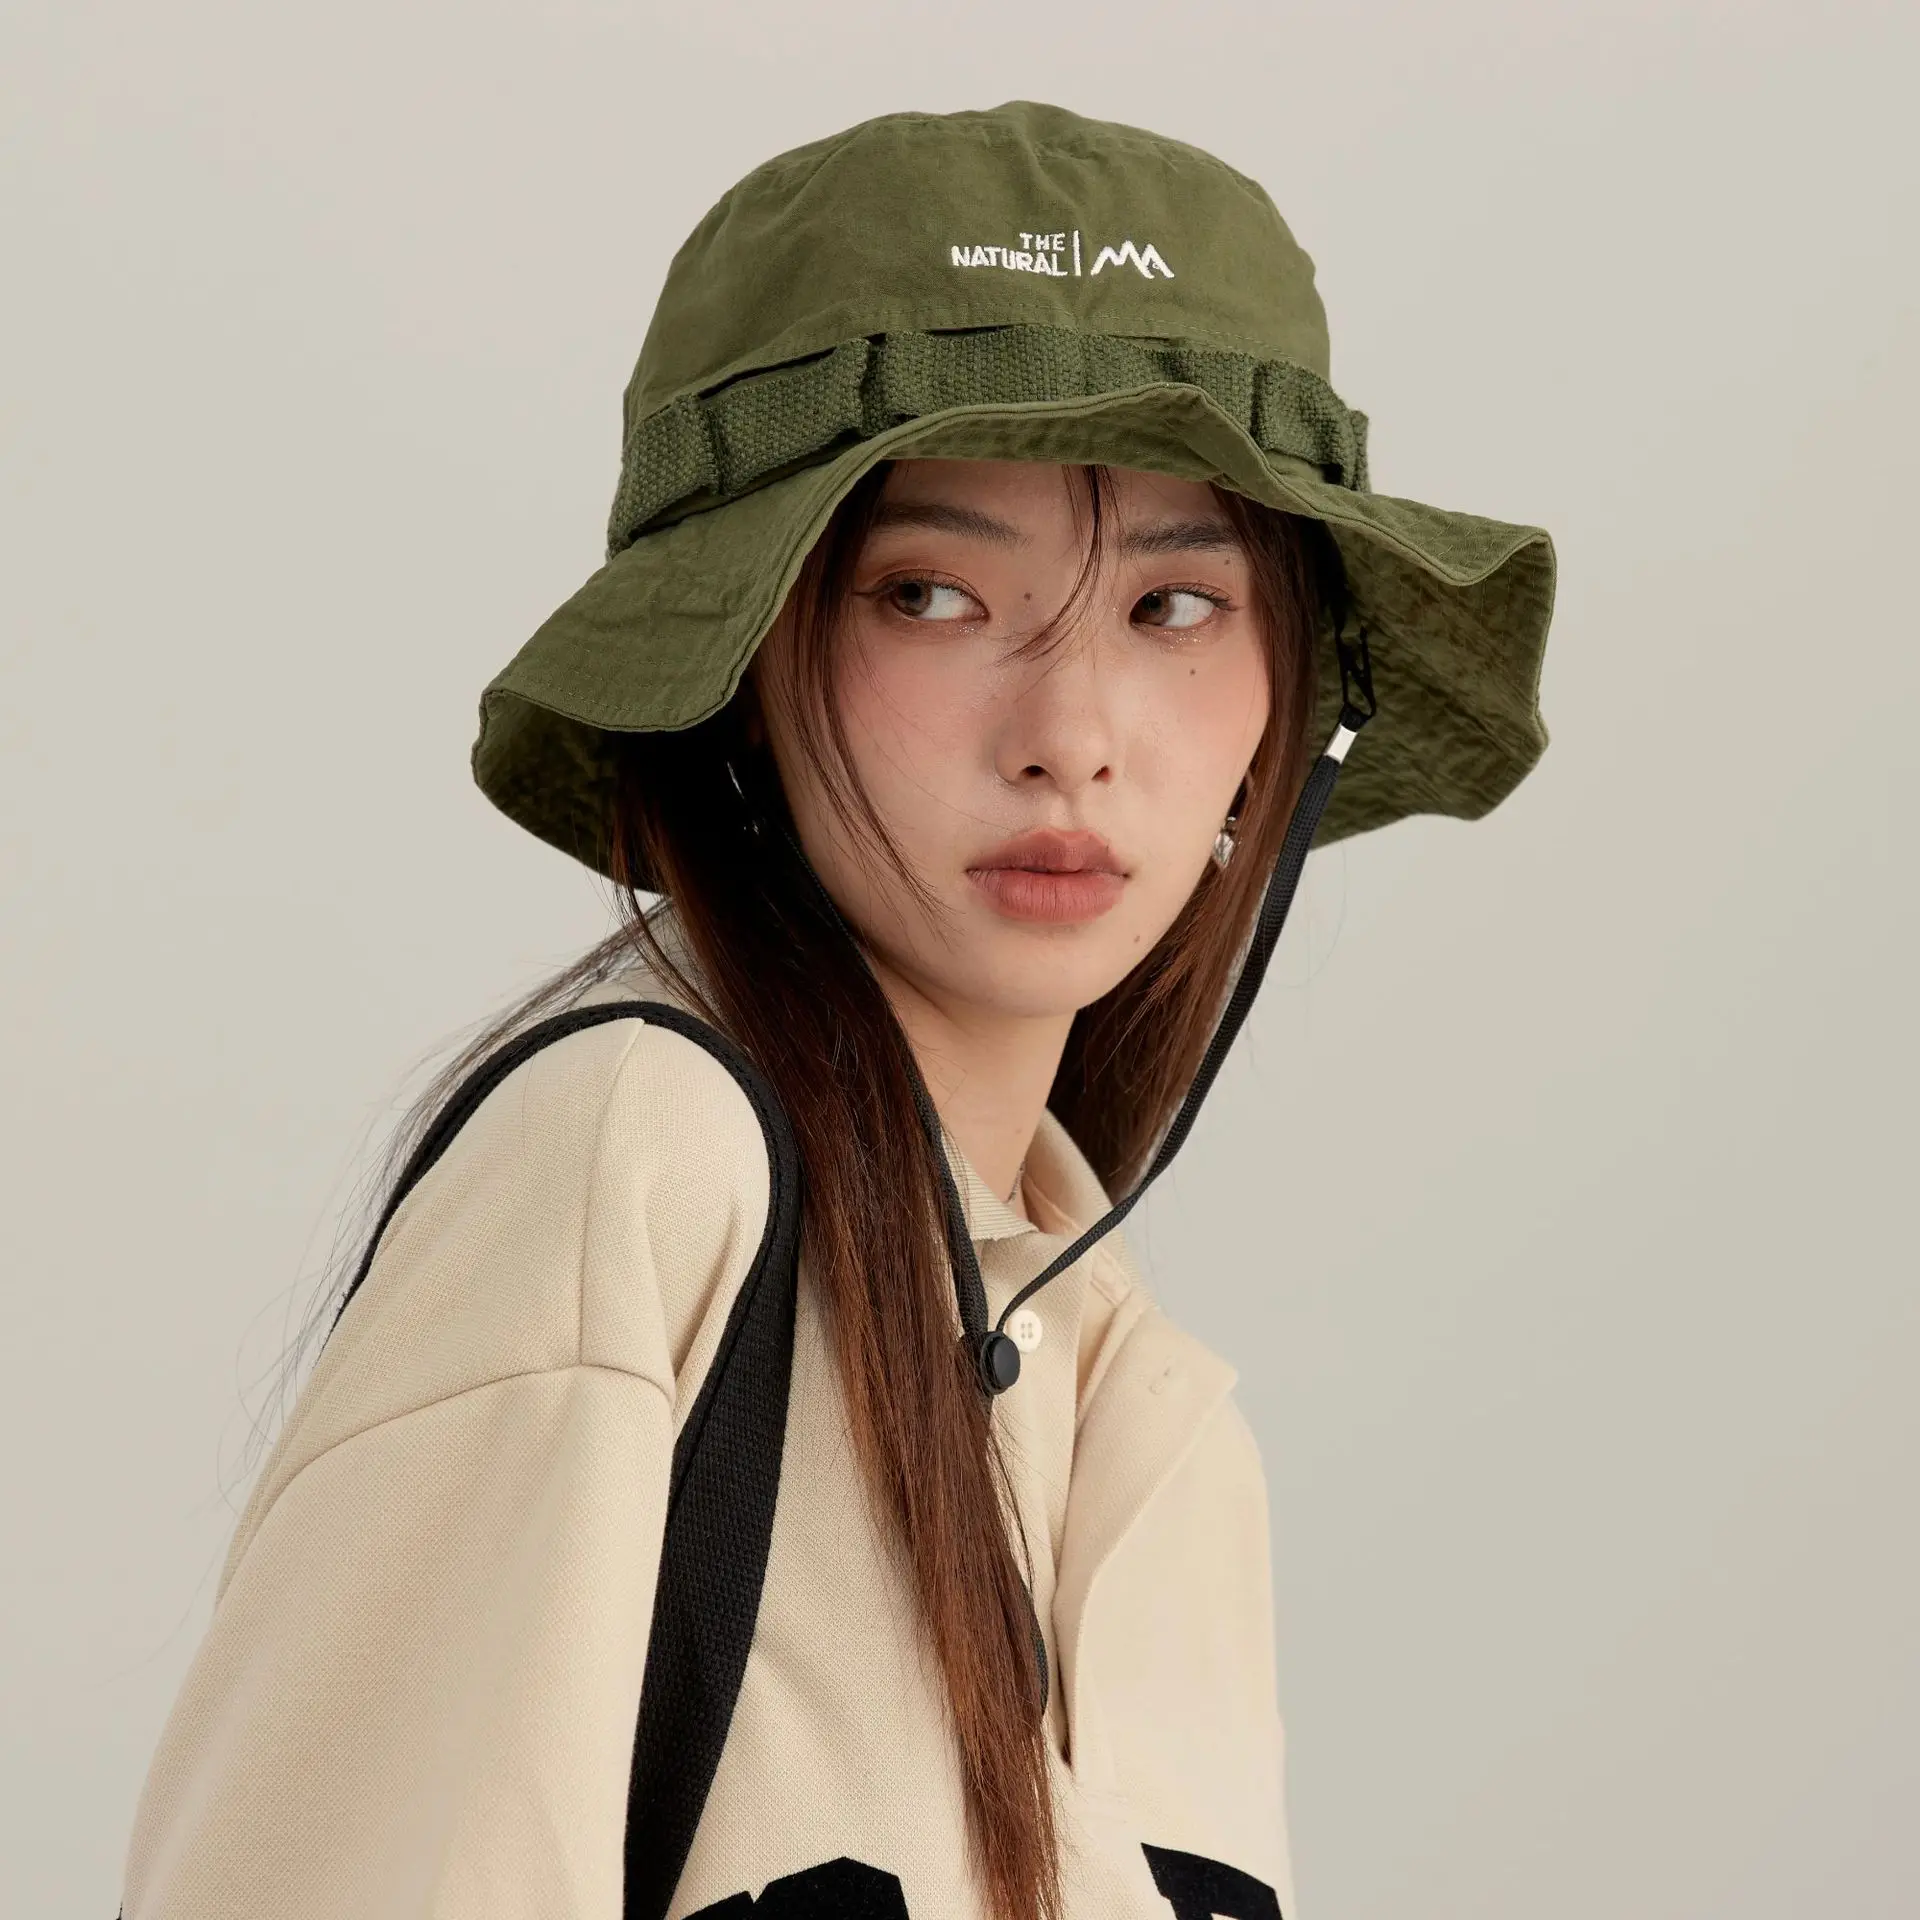 Waterproof Bucket Hat for Women Summer Outdoor UV Protection Sun Hat Breathable Mesh Hiking Fishing Hat Panama Cap кепка женская